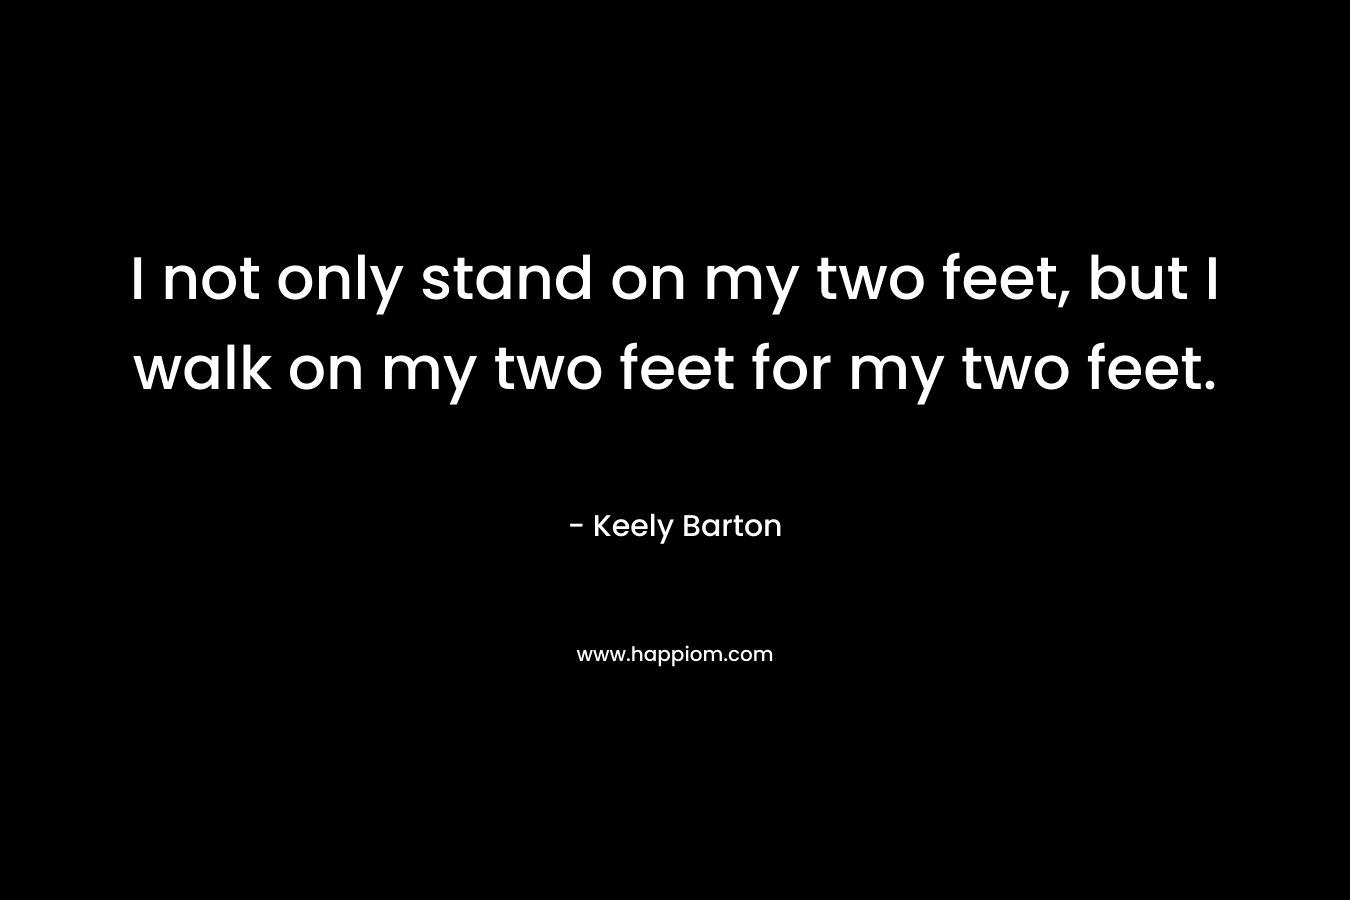 I not only stand on my two feet, but I walk on my two feet for my two feet. – Keely Barton